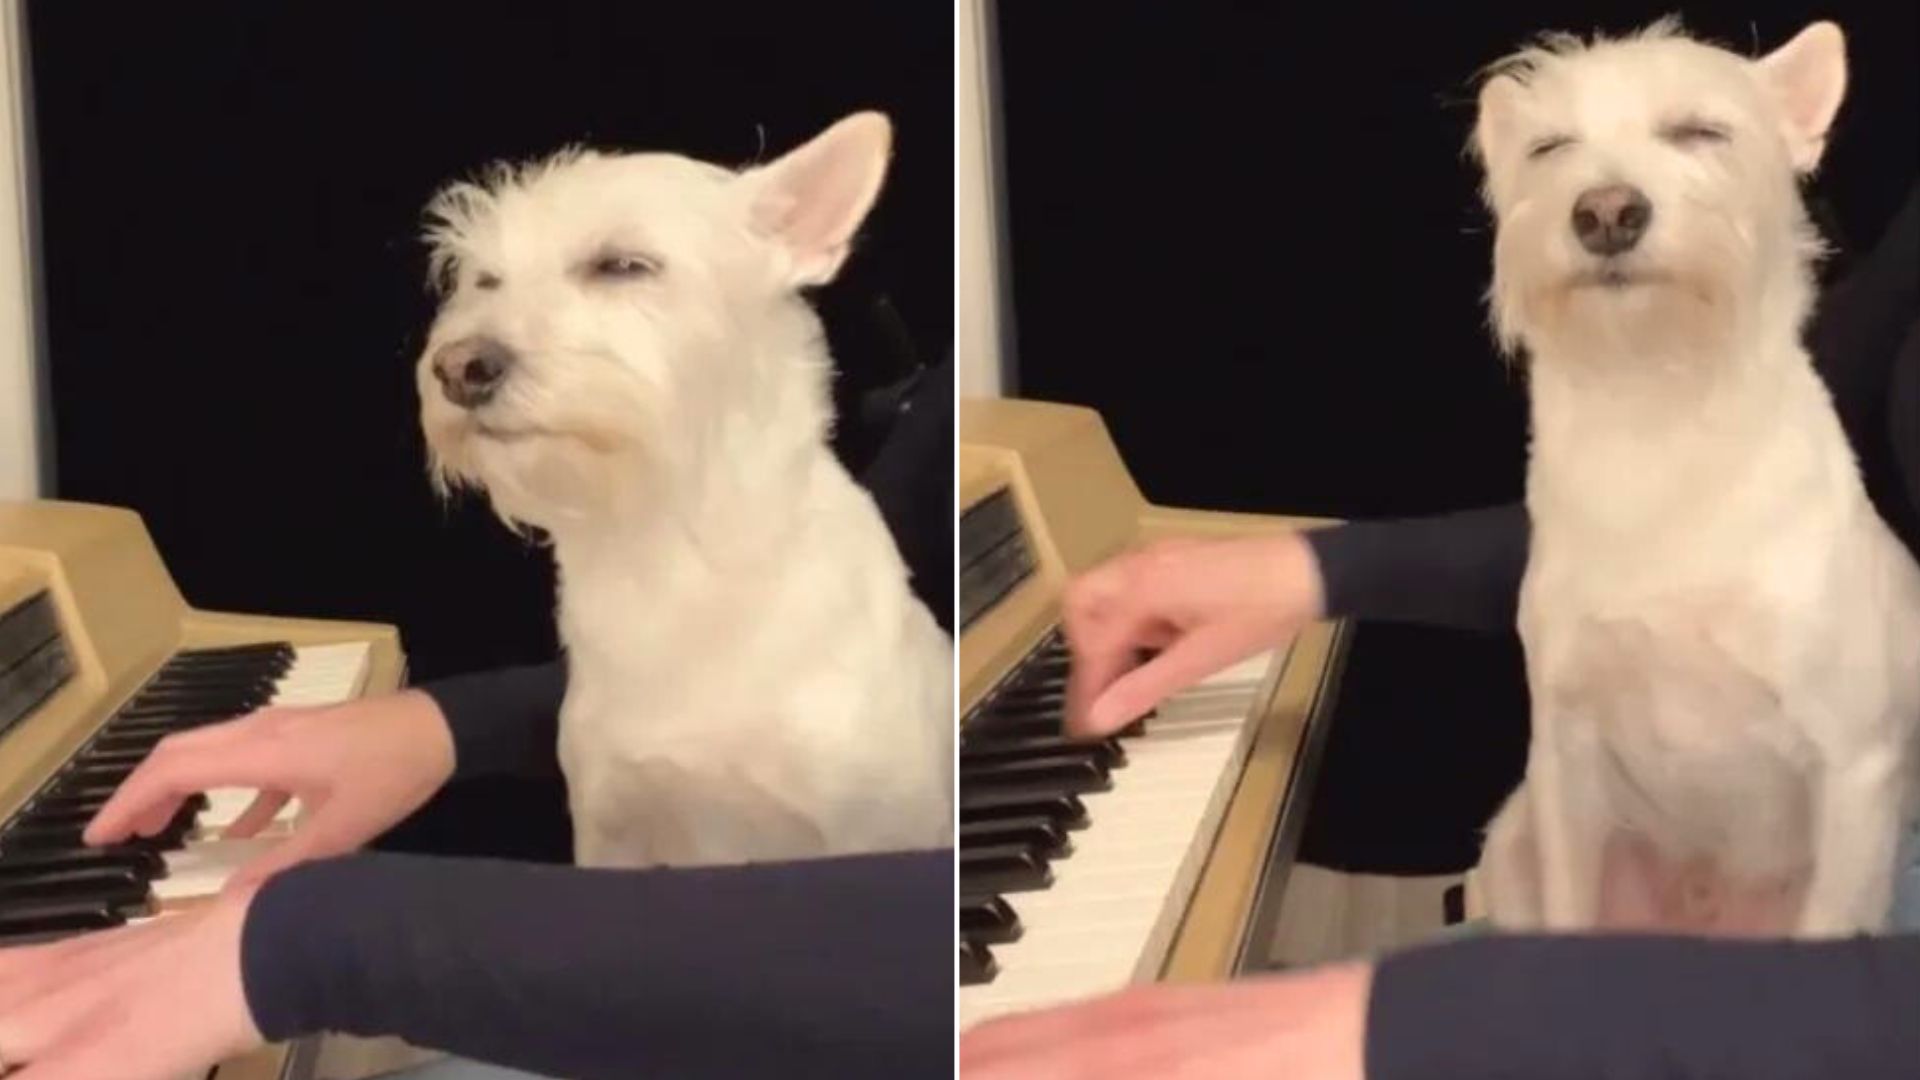 Musician Creates Art On The Jazz Piano With A Dog In Her Lap As Her Biggest Inspiration